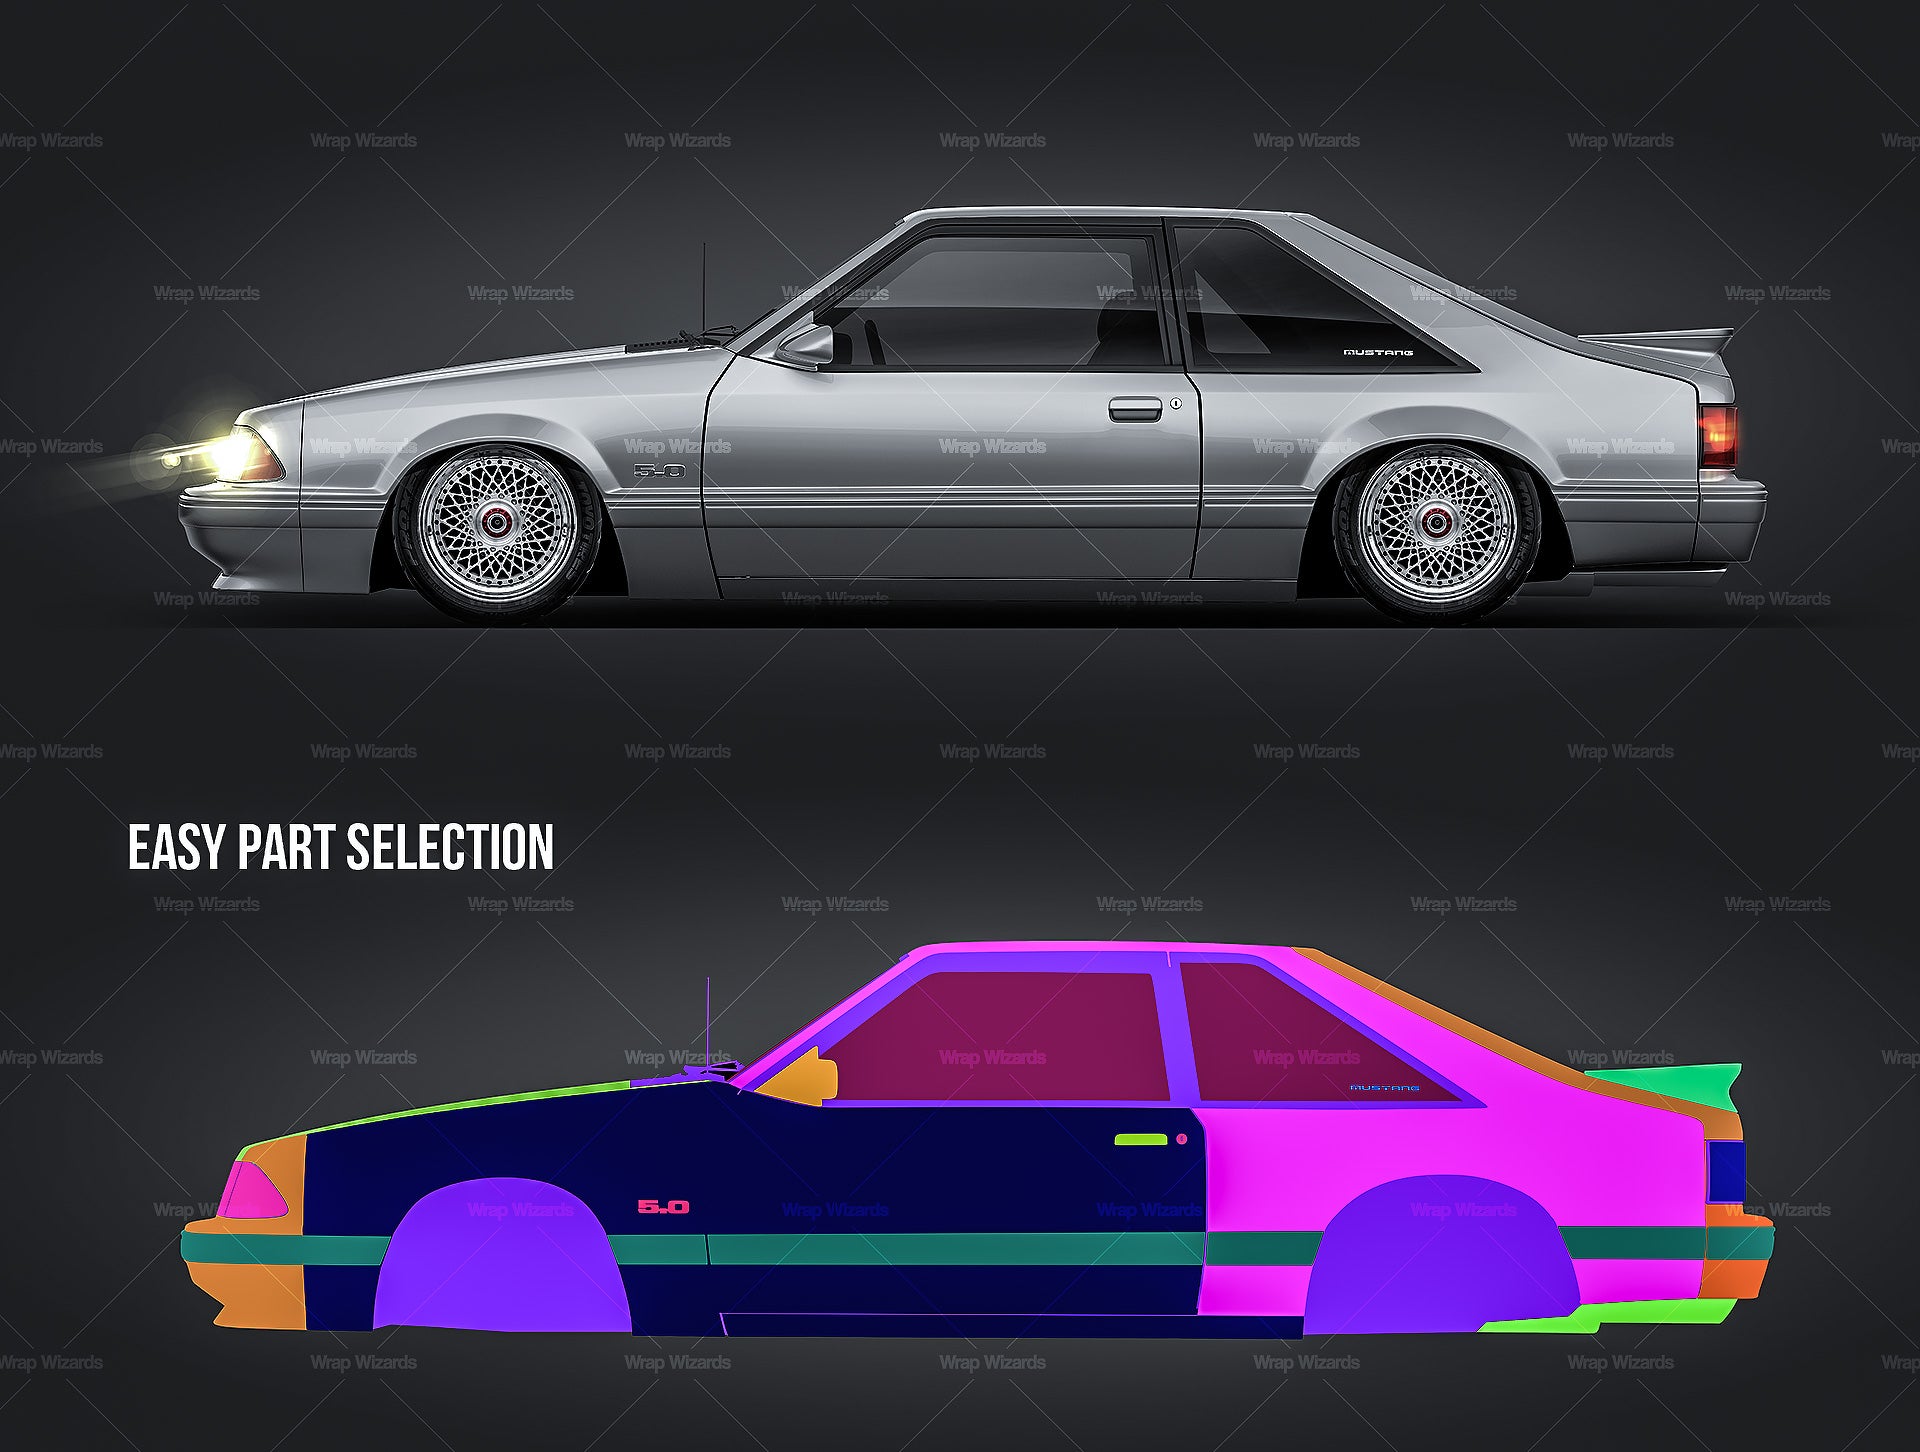 Ford Mustang Foxbody 1987-1993 glossy finish - all sides Car Mockup Template.psd